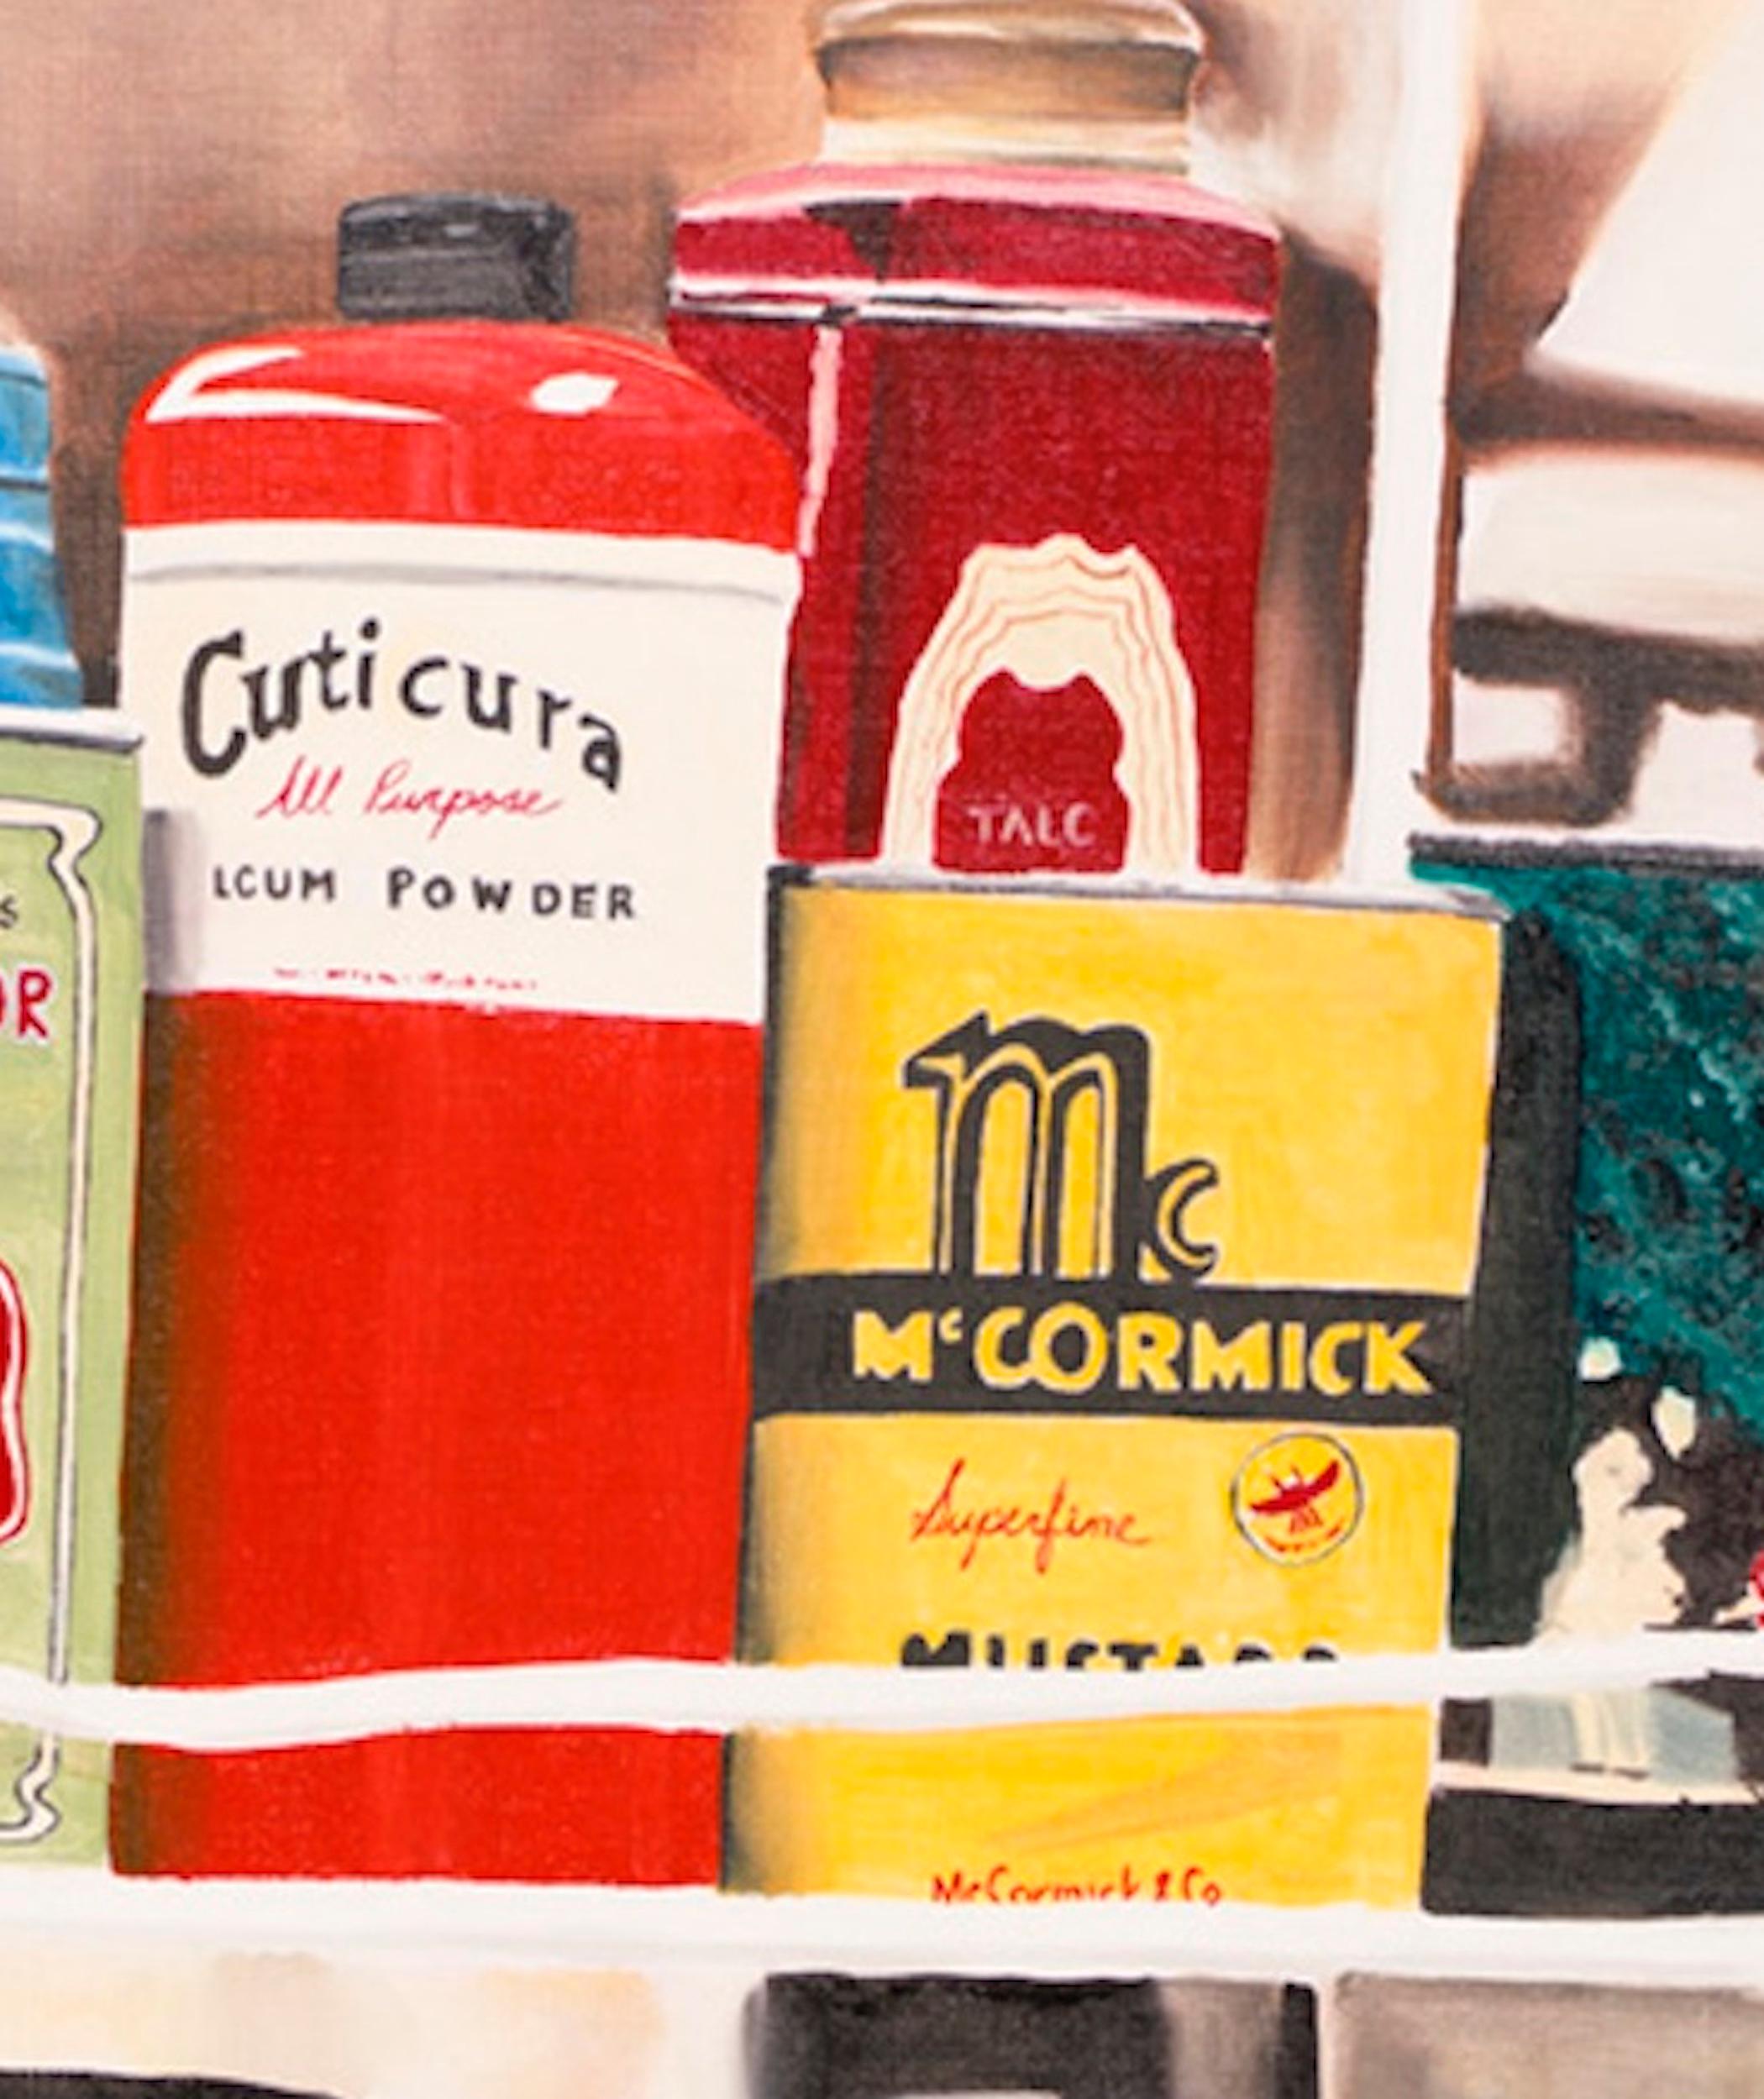 McCormick Mustard - Original Oil Painting by Renowned Photorealist Mark Schiff For Sale 1